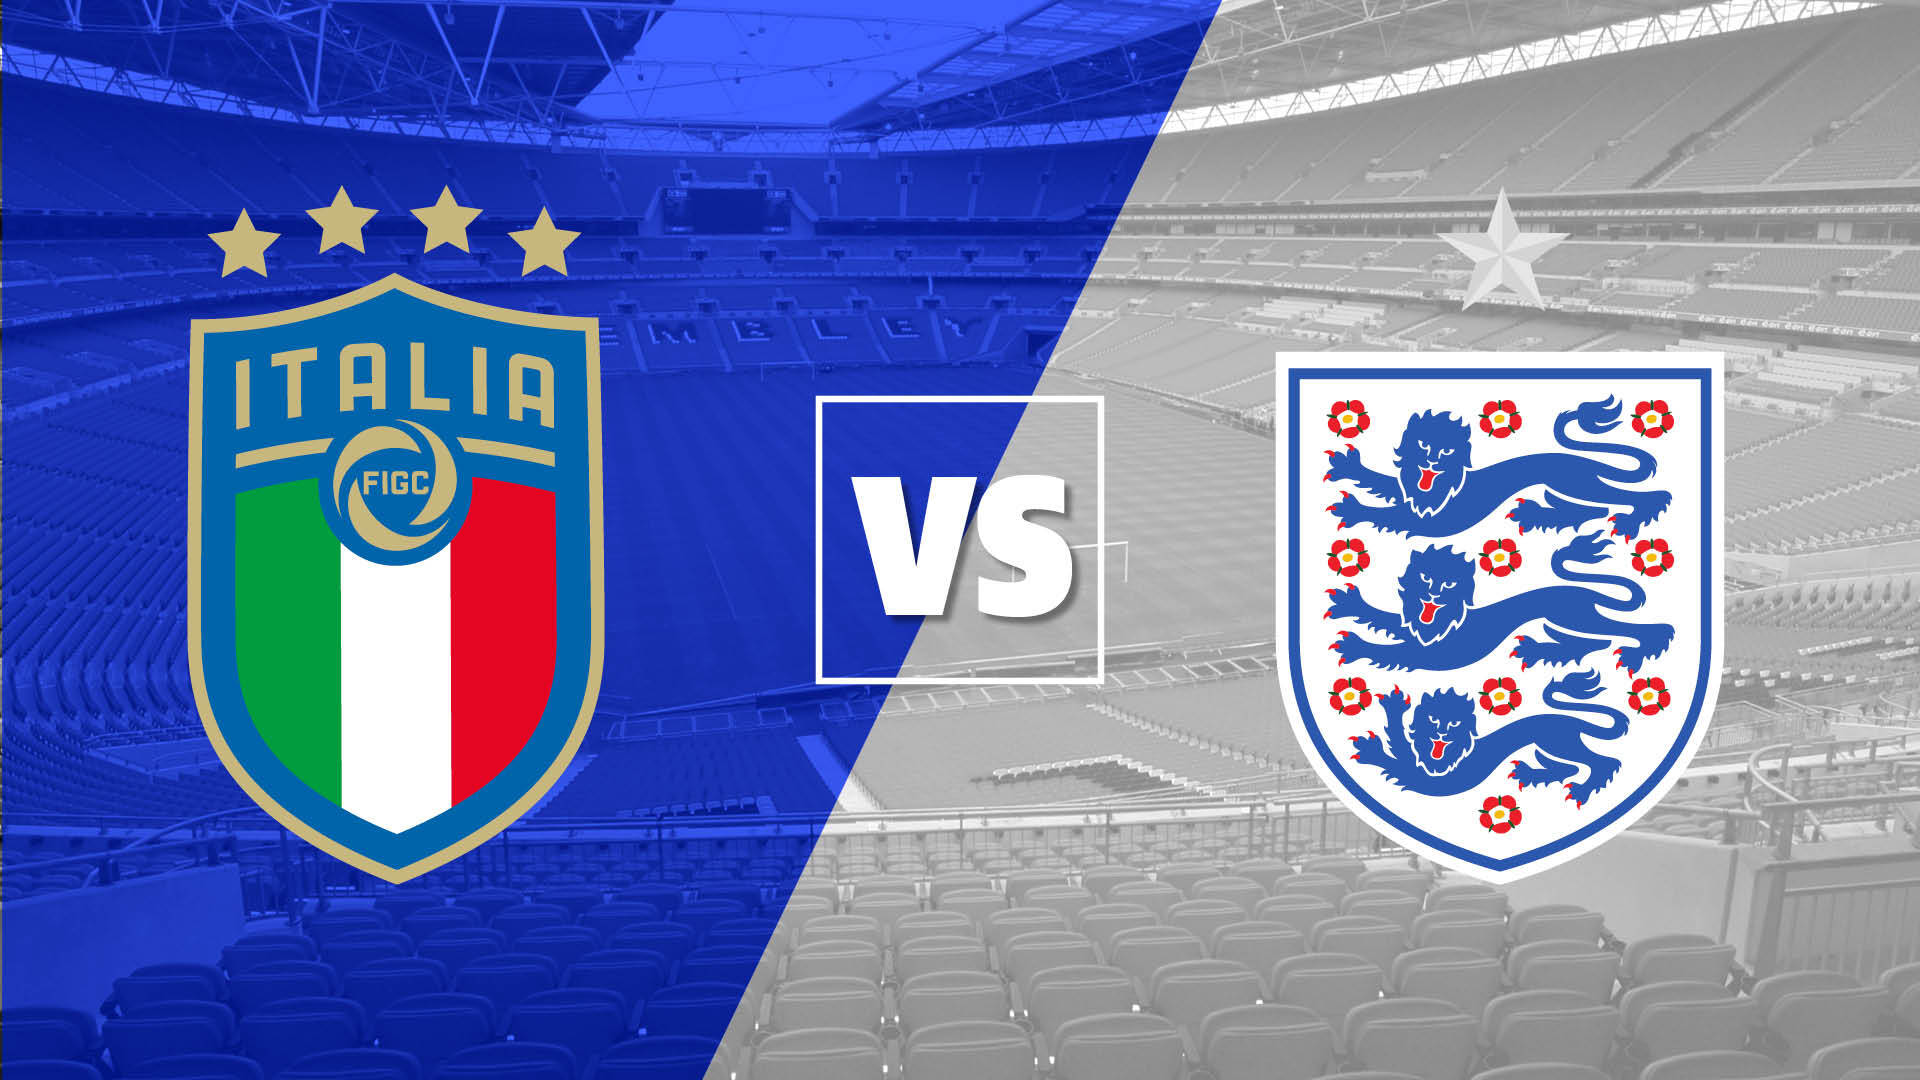 Italy Vs England Match Tips and Betting Odds